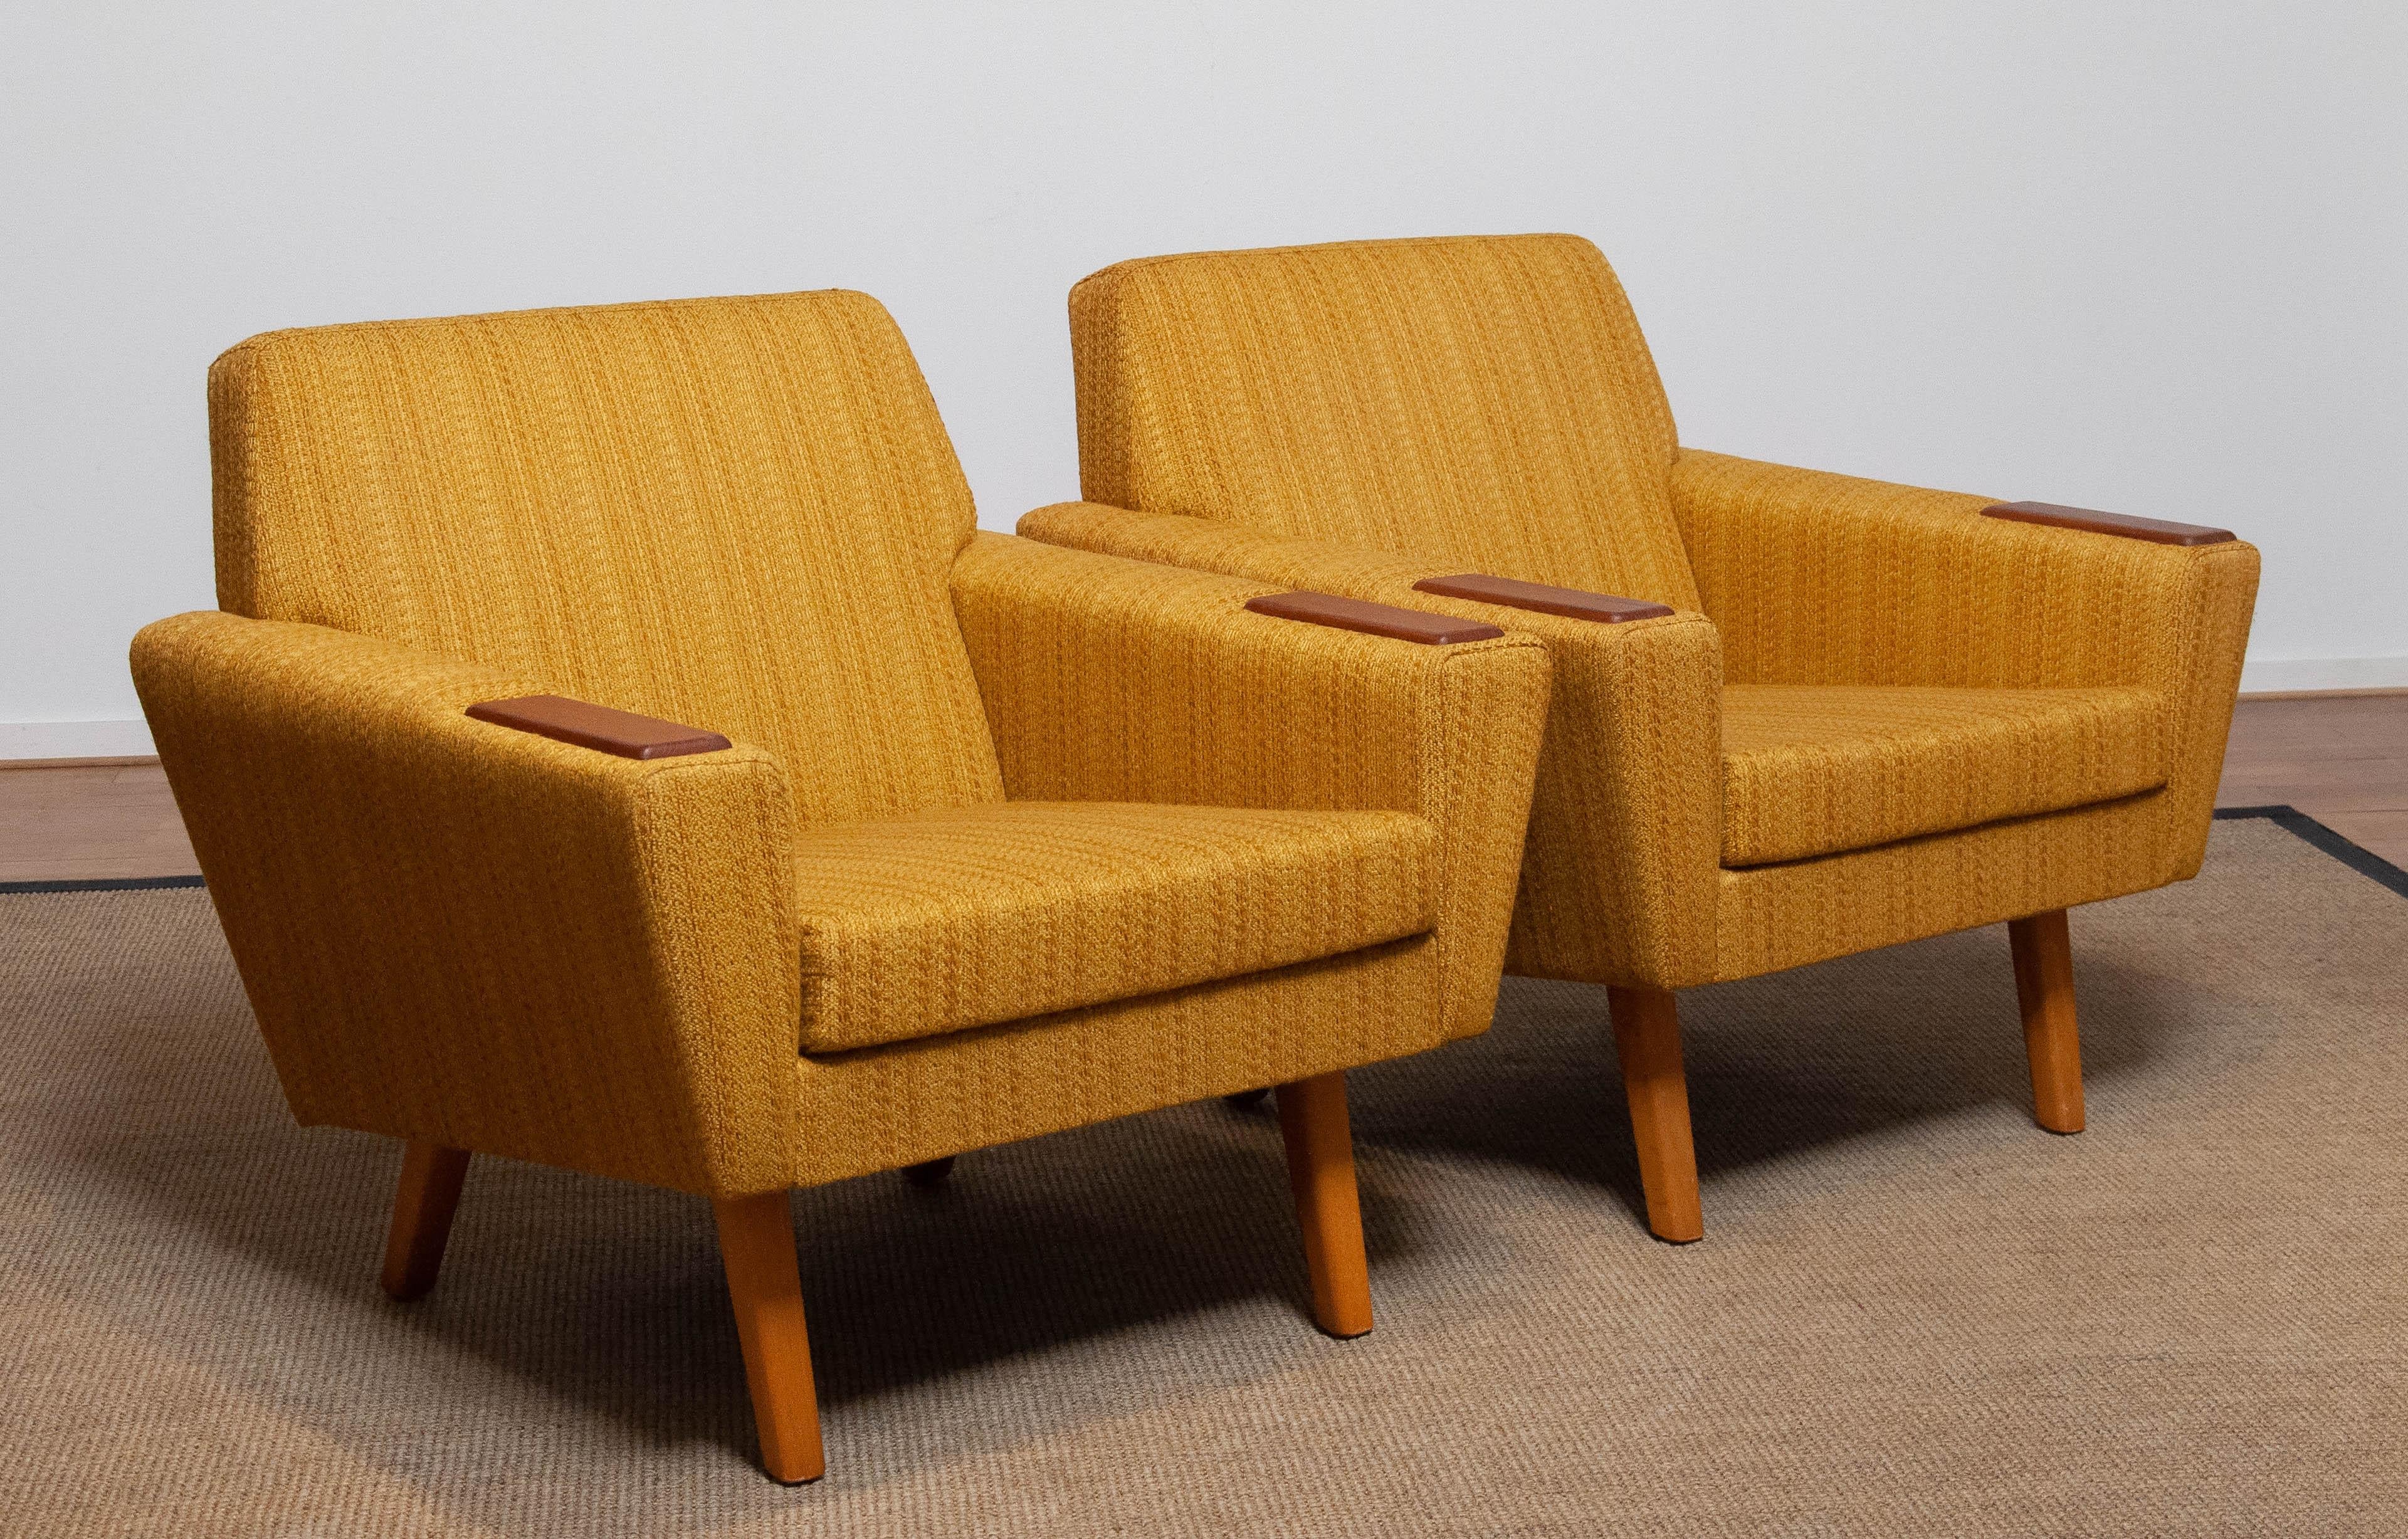 Pair Scandinavian Lounge / Club Chairs with Teak Paws and Ocher Fabric, Denmark In Good Condition For Sale In Silvolde, Gelderland